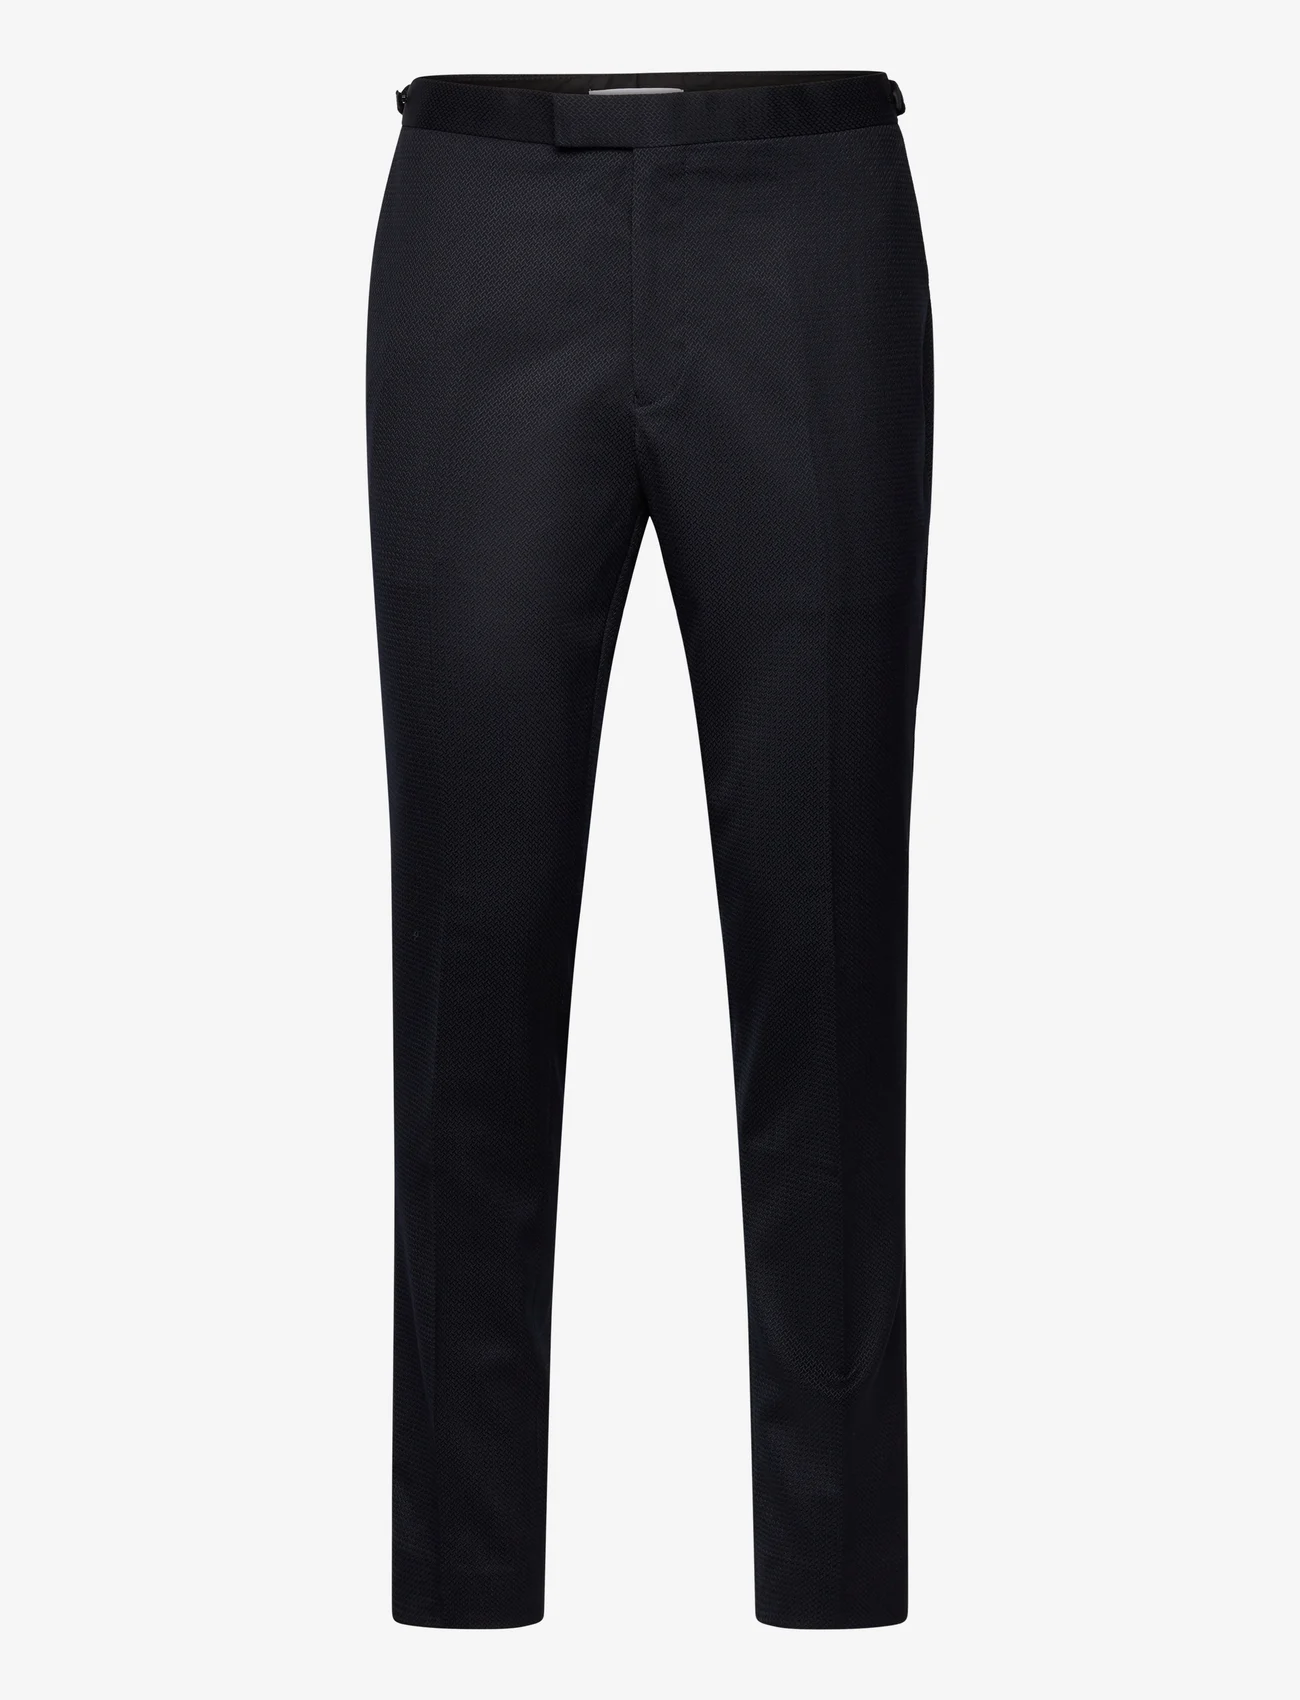 Reiss - DEAL - suit trousers - navy - 0